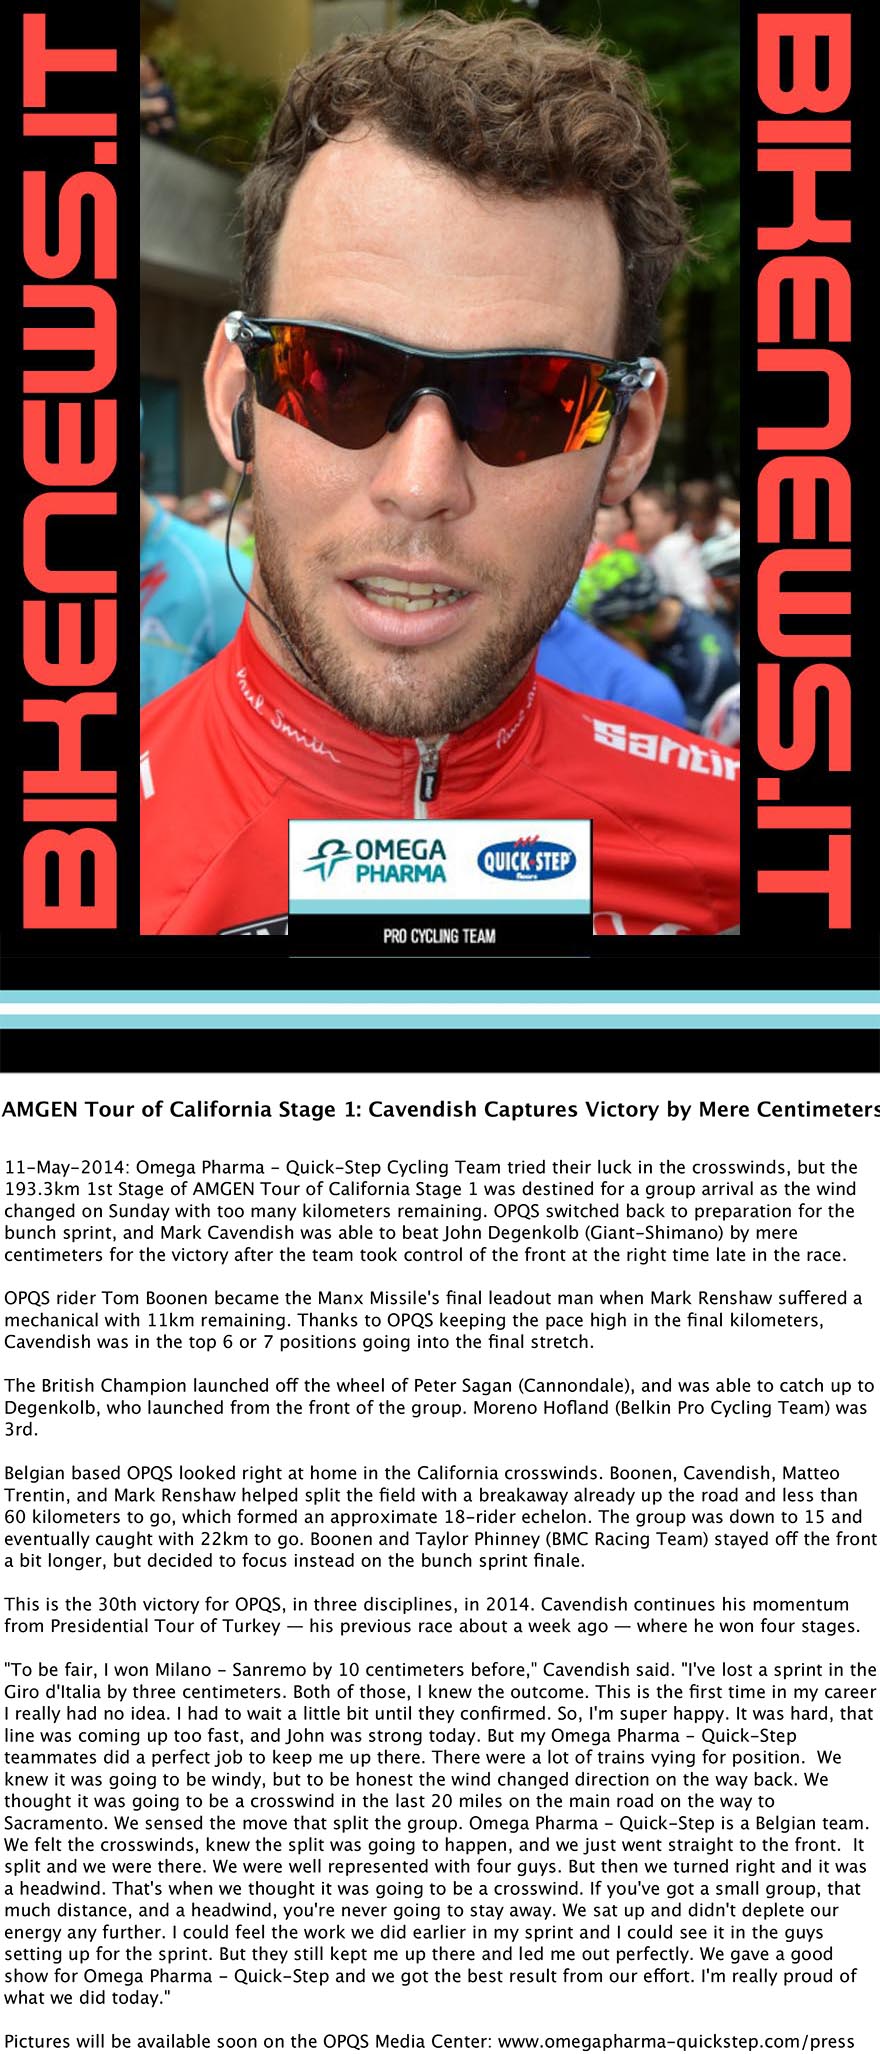 AMGEN Tour of California Stage 1 Cavendish Captures Victory by Mere Centimeters